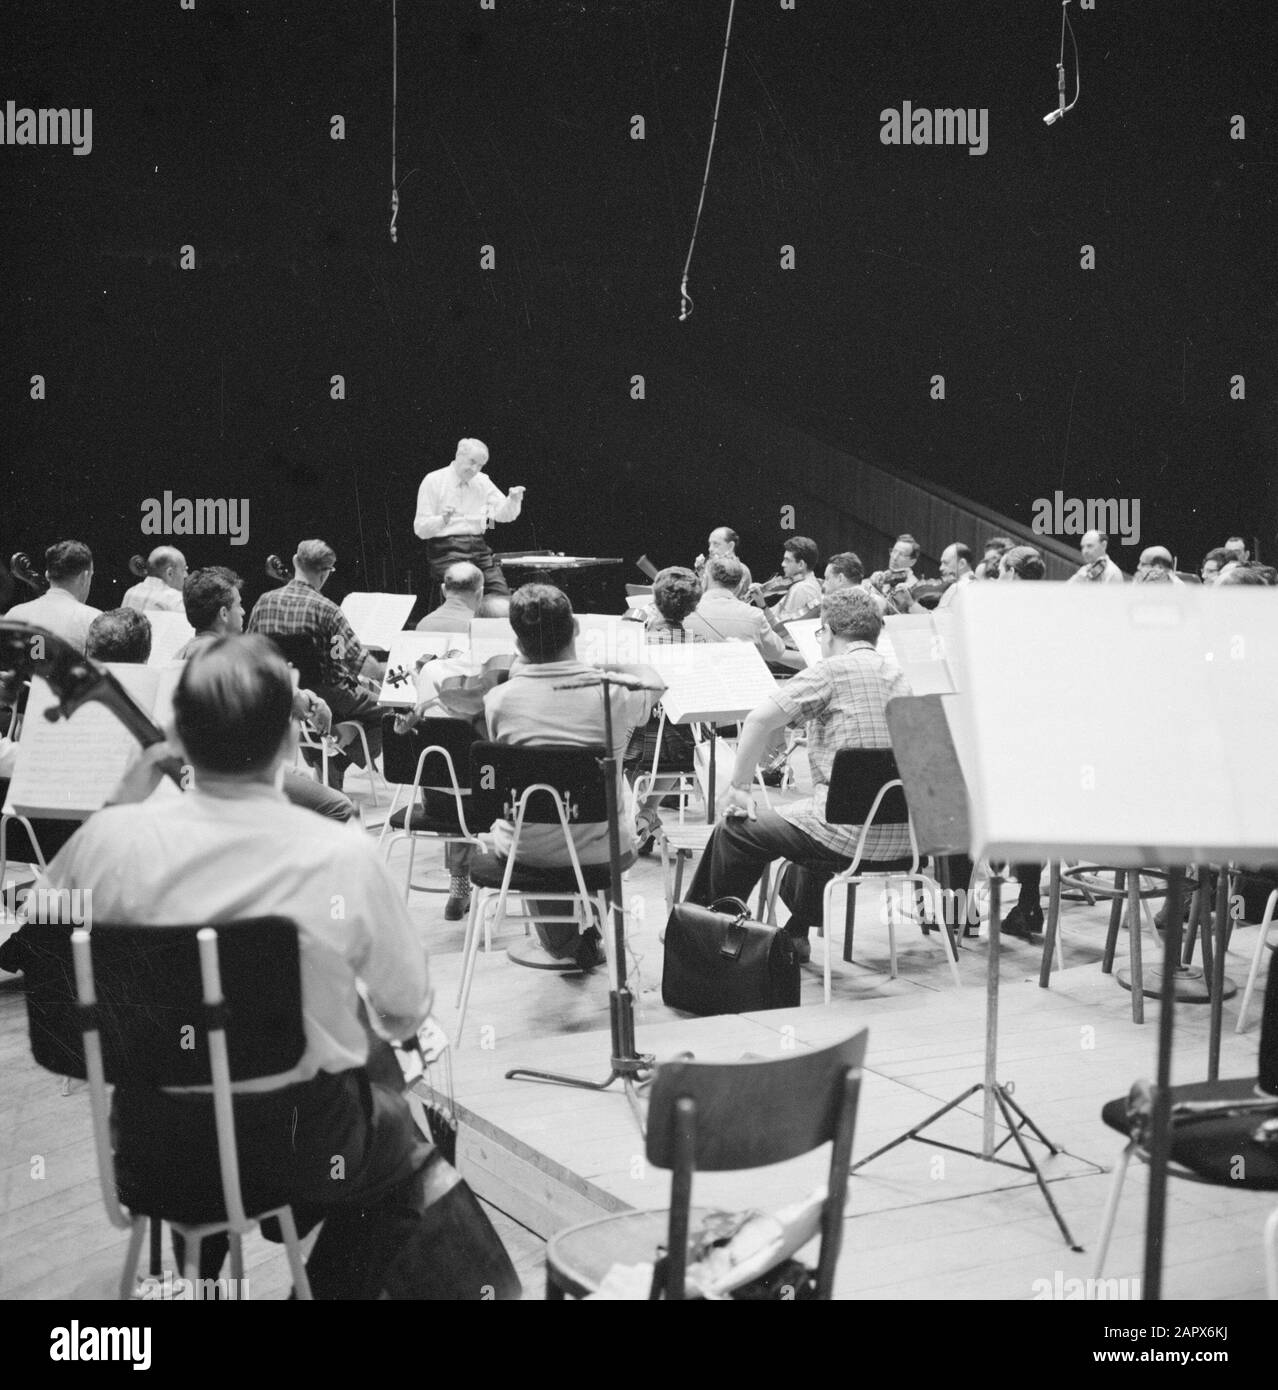 Israel 1964-1965: Tel Aviv, orchestra  Rehearsal of an orchestra, presumably the Israel Philharmonic Orchestra in the Mann auditorium Date: 1964 Location: Israel, Tel Aviv Keywords: conductors, interiors, music, orchestras, rehearsals Personal name: Münch, Charles Stock Photo